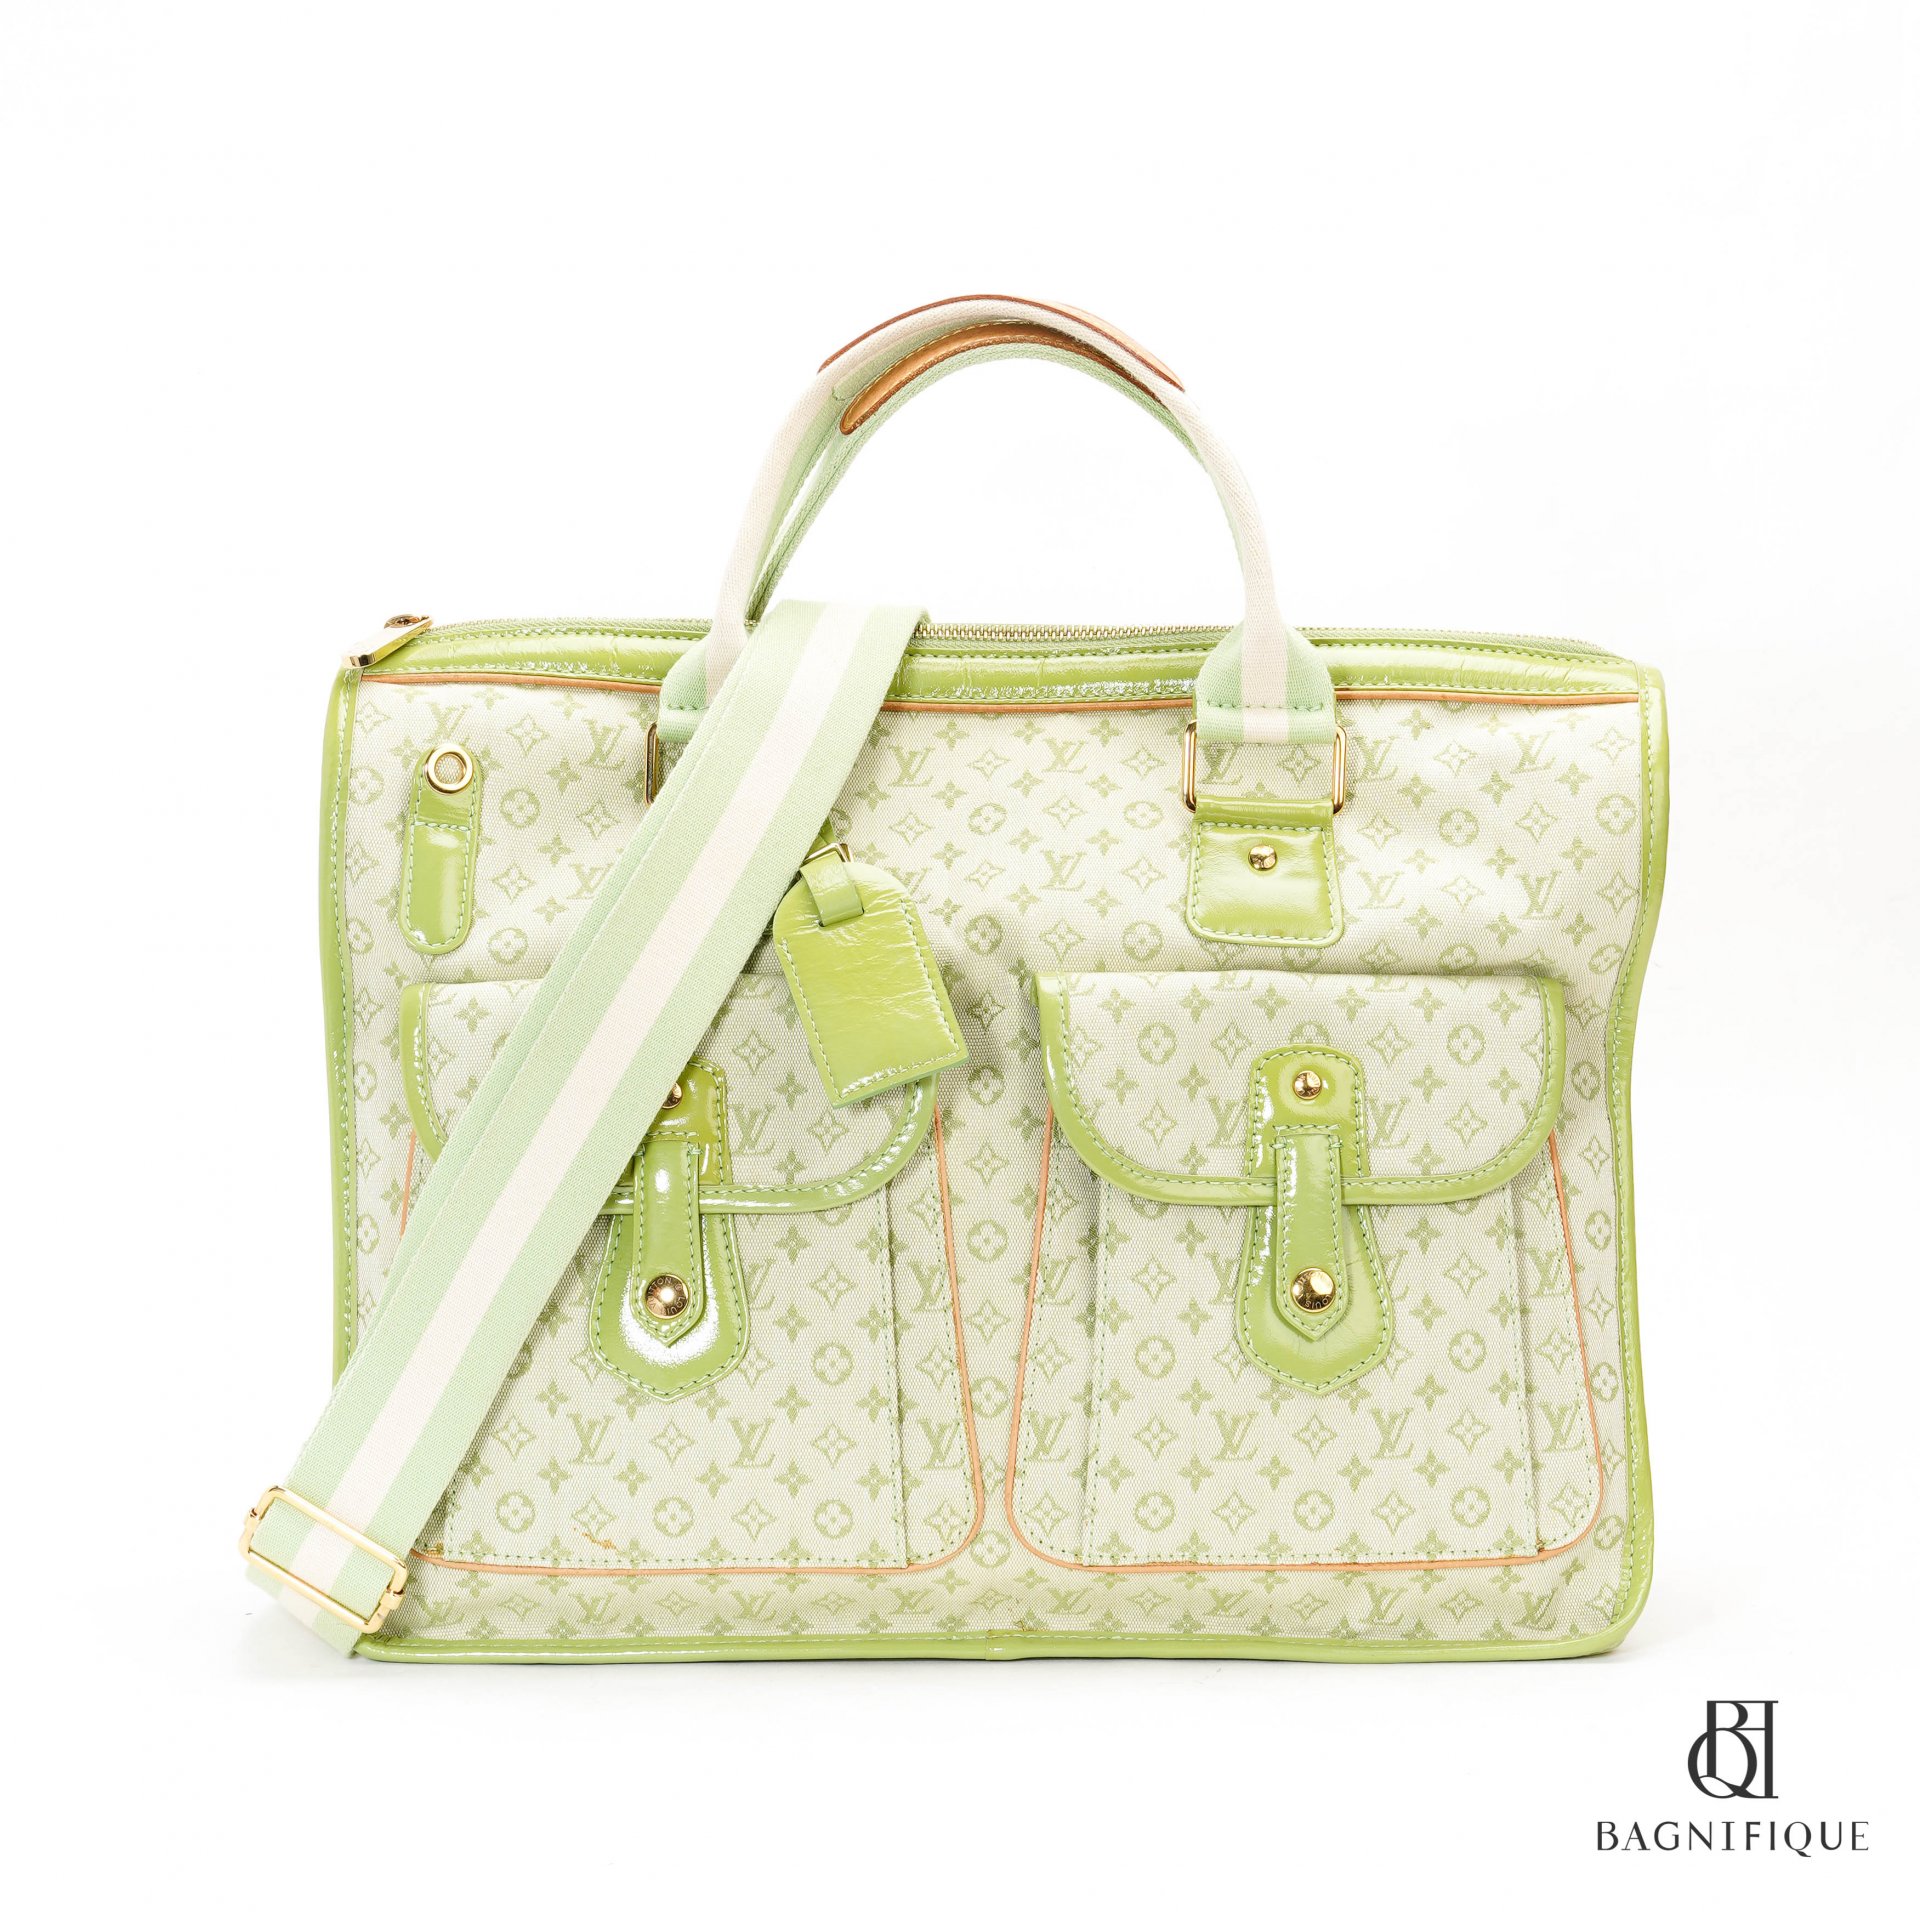 LOUIS VUITTON MARY KATE TOTE 38 GREEN MONOGRAM CANVAS GHW